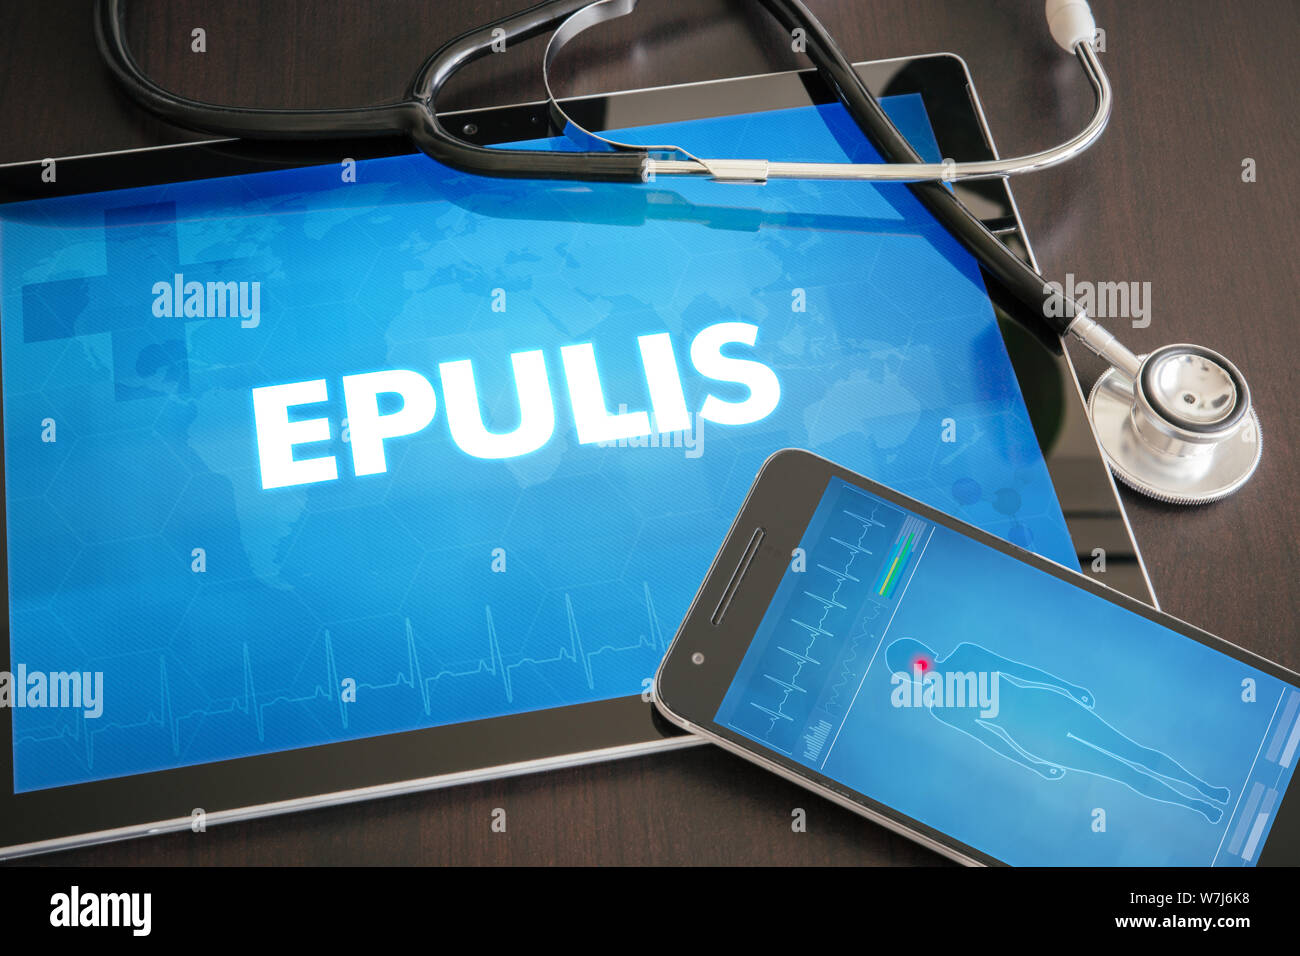 Epulis (cutaneous disease) diagnosis medical concept on tablet screen with stethoscope. Stock Photo